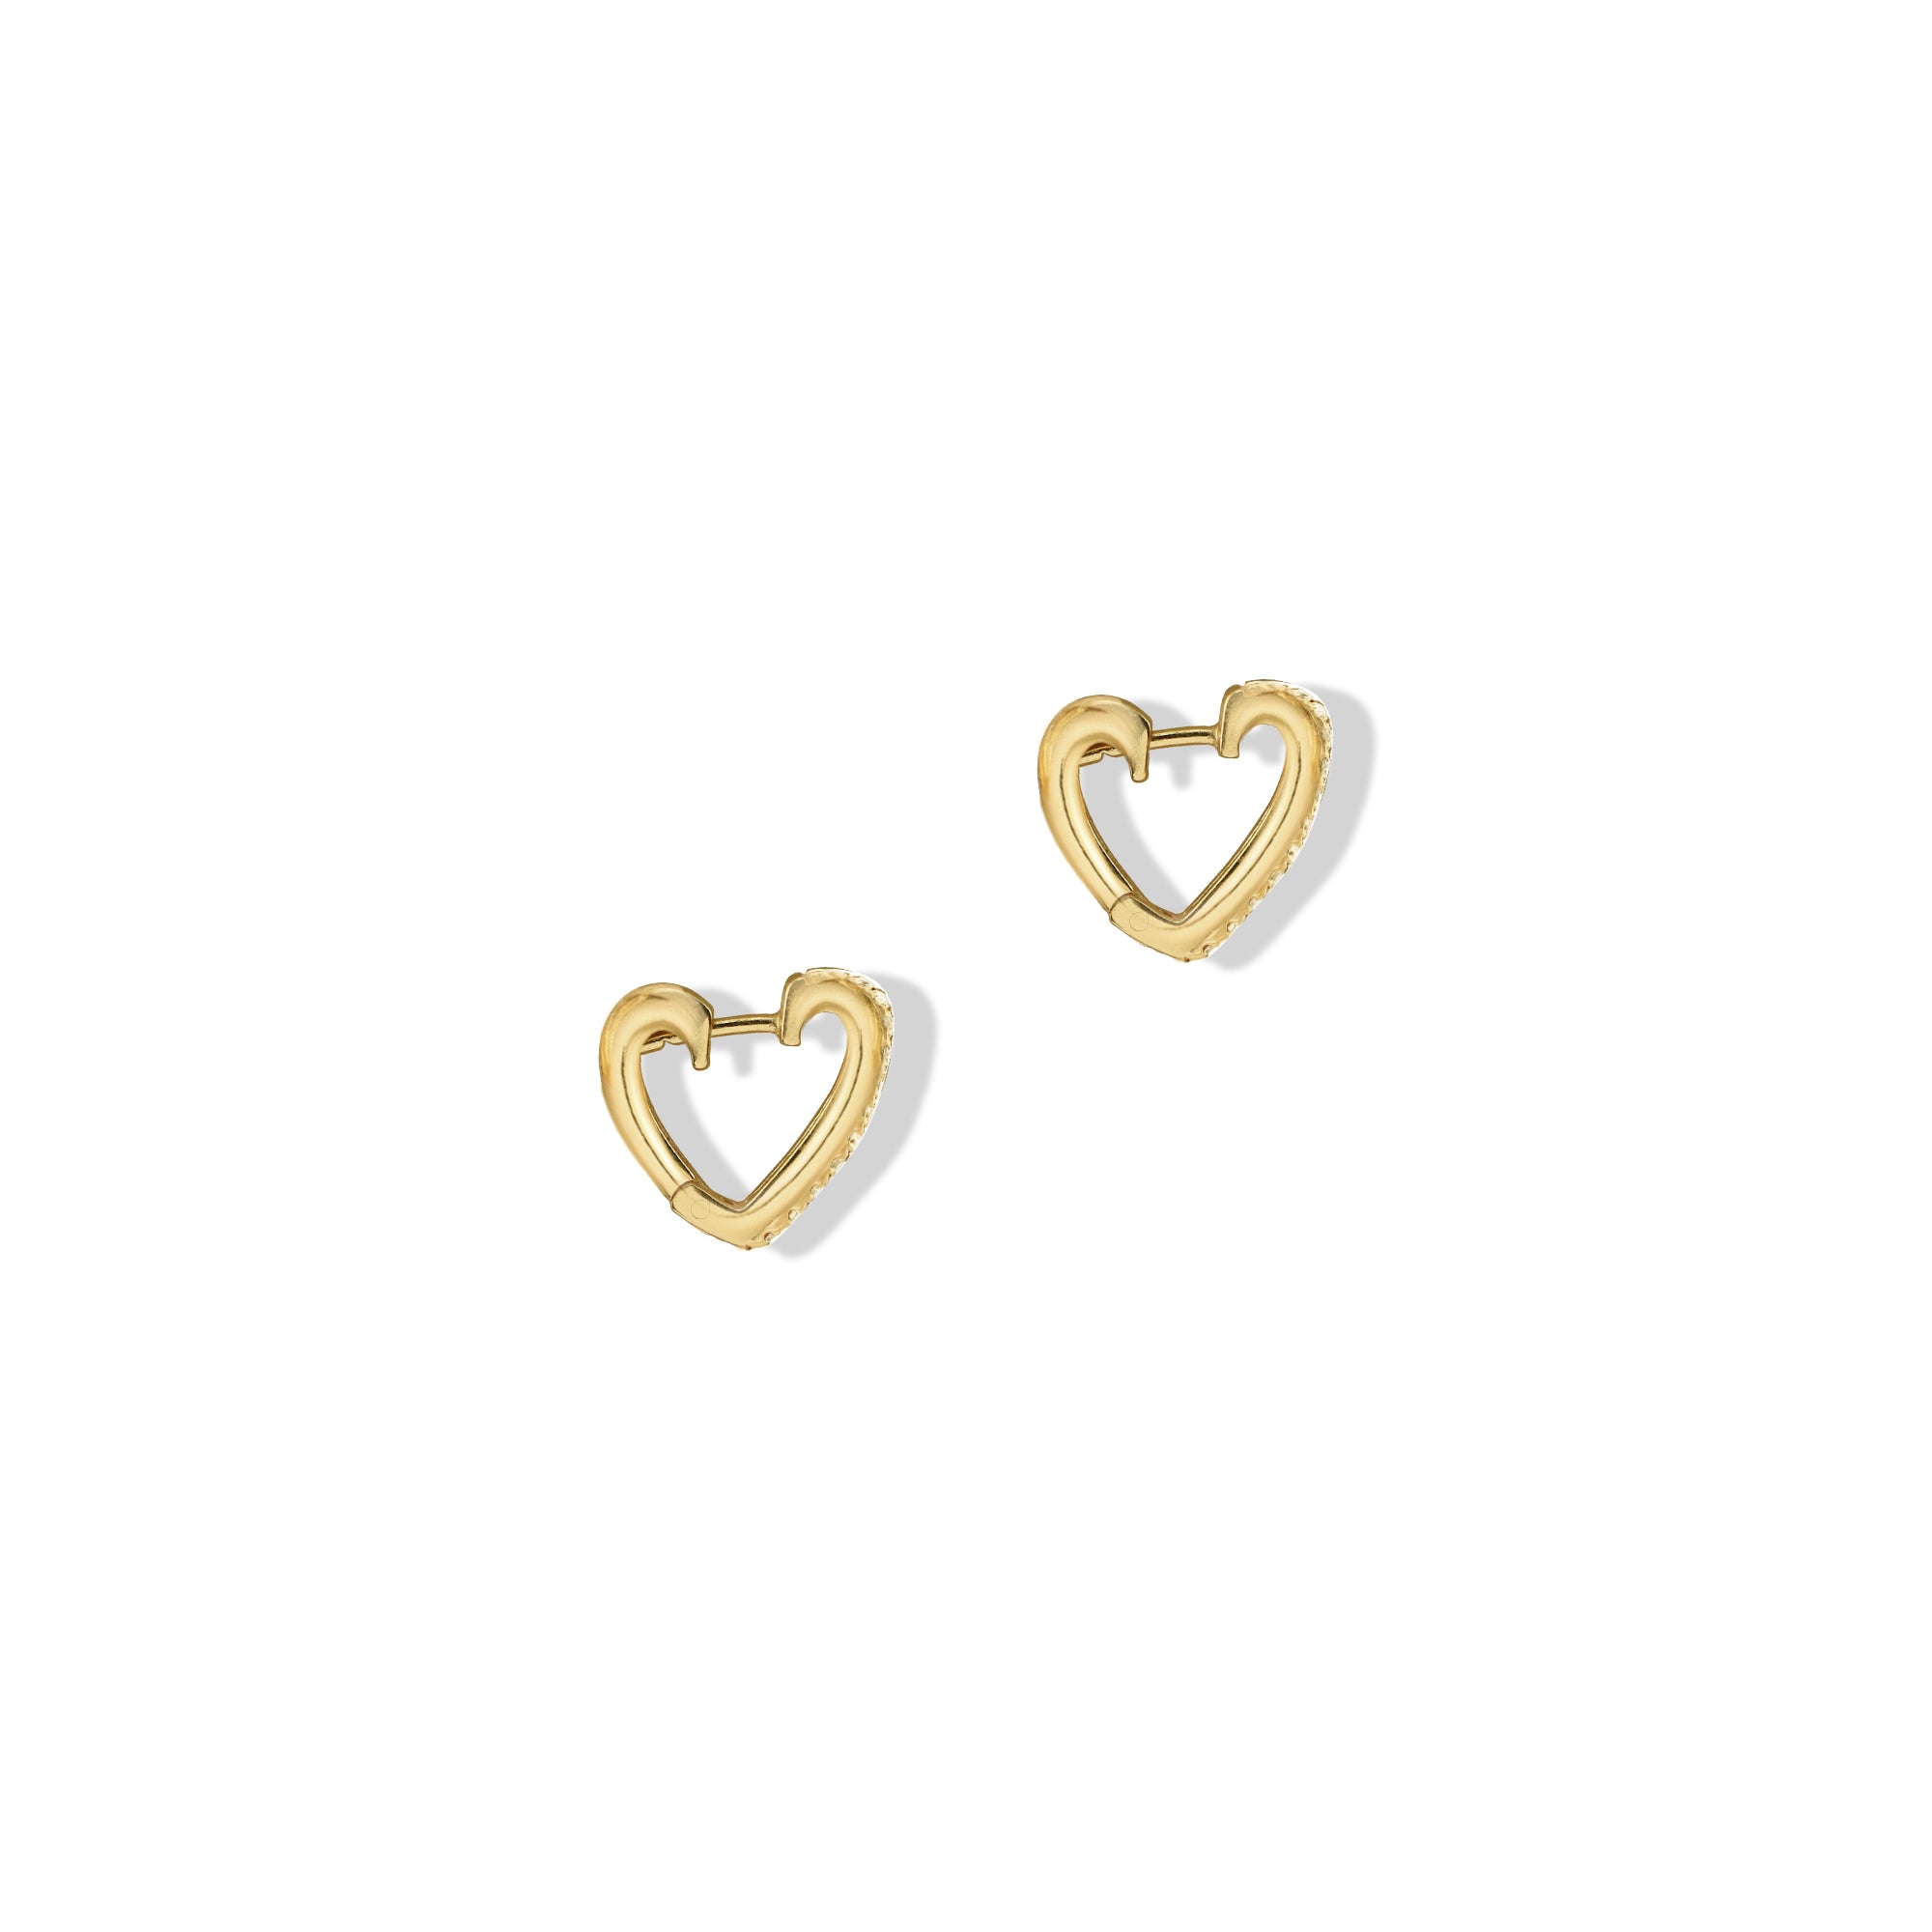 THE AMOUR GLOW EARRINGS